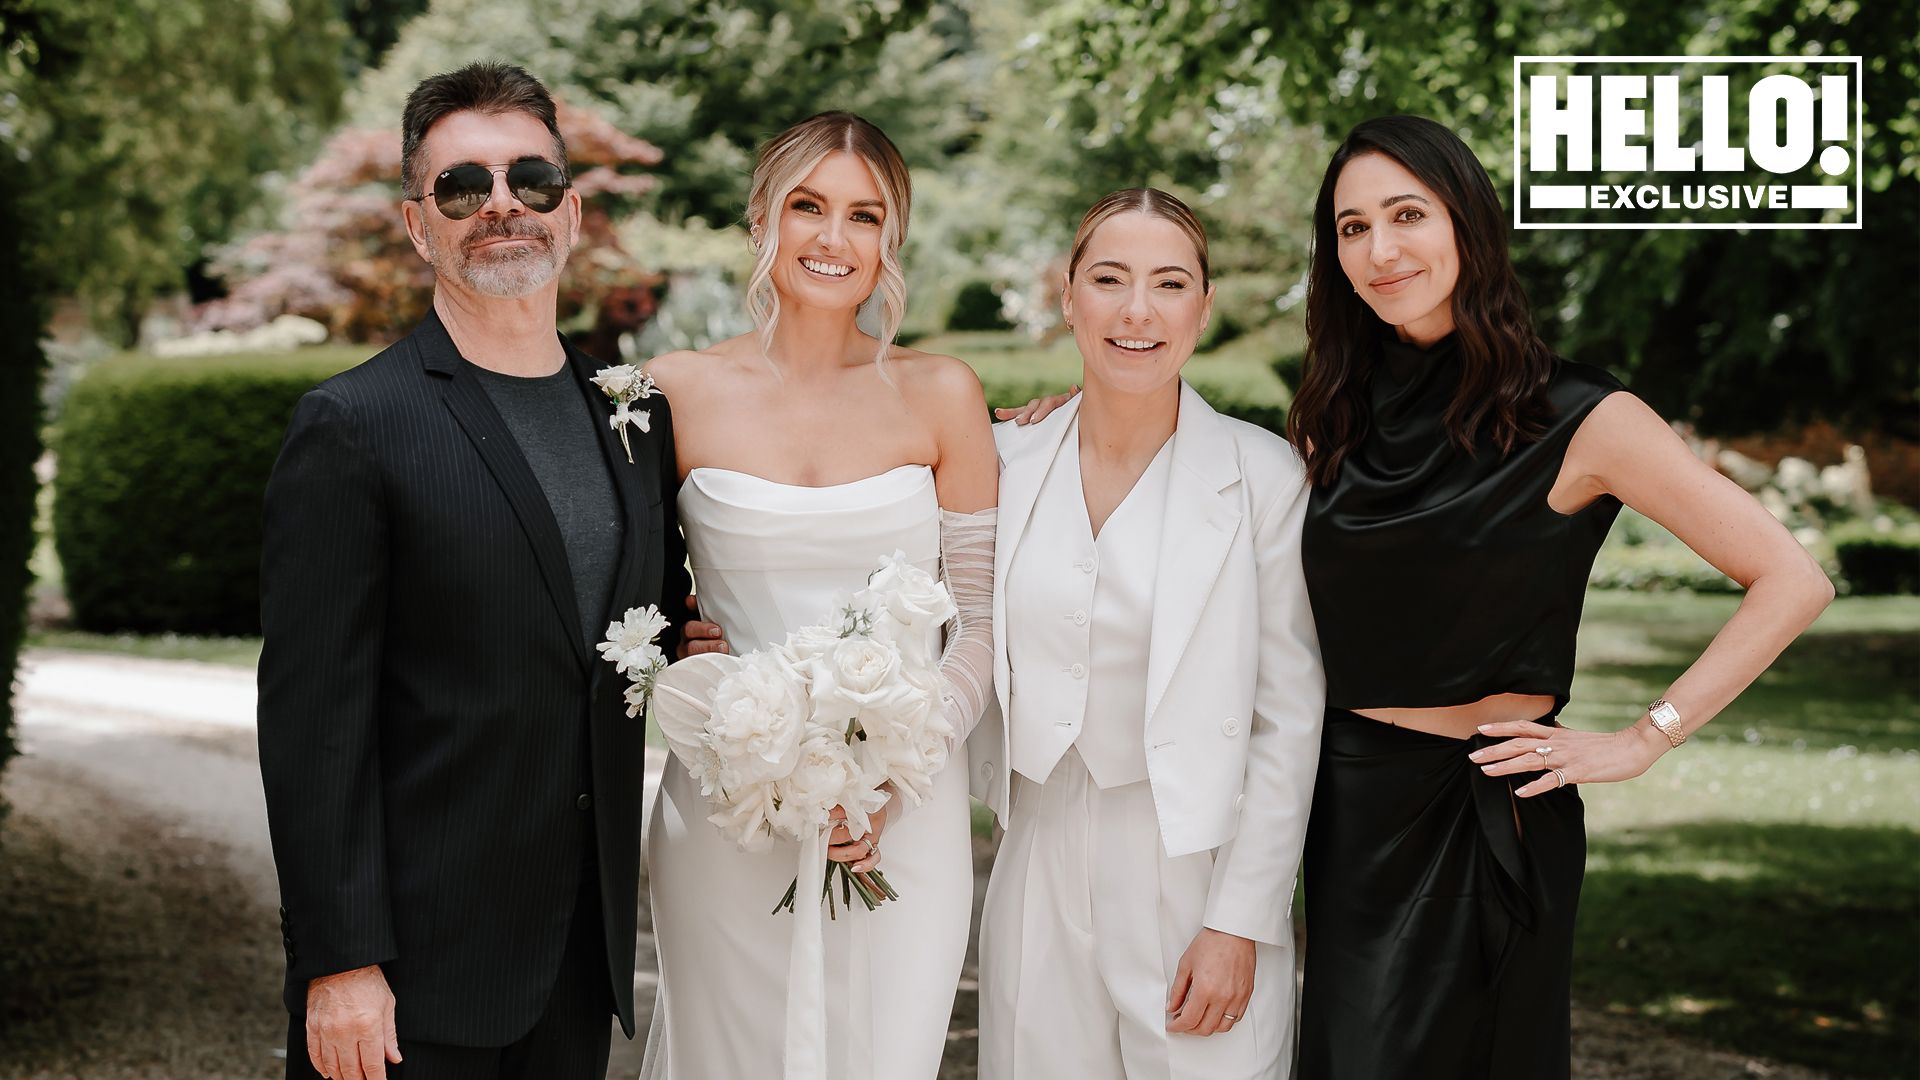 Simon Cowell and Lauren Silverman pose with Lucy Spraggan after her wedding